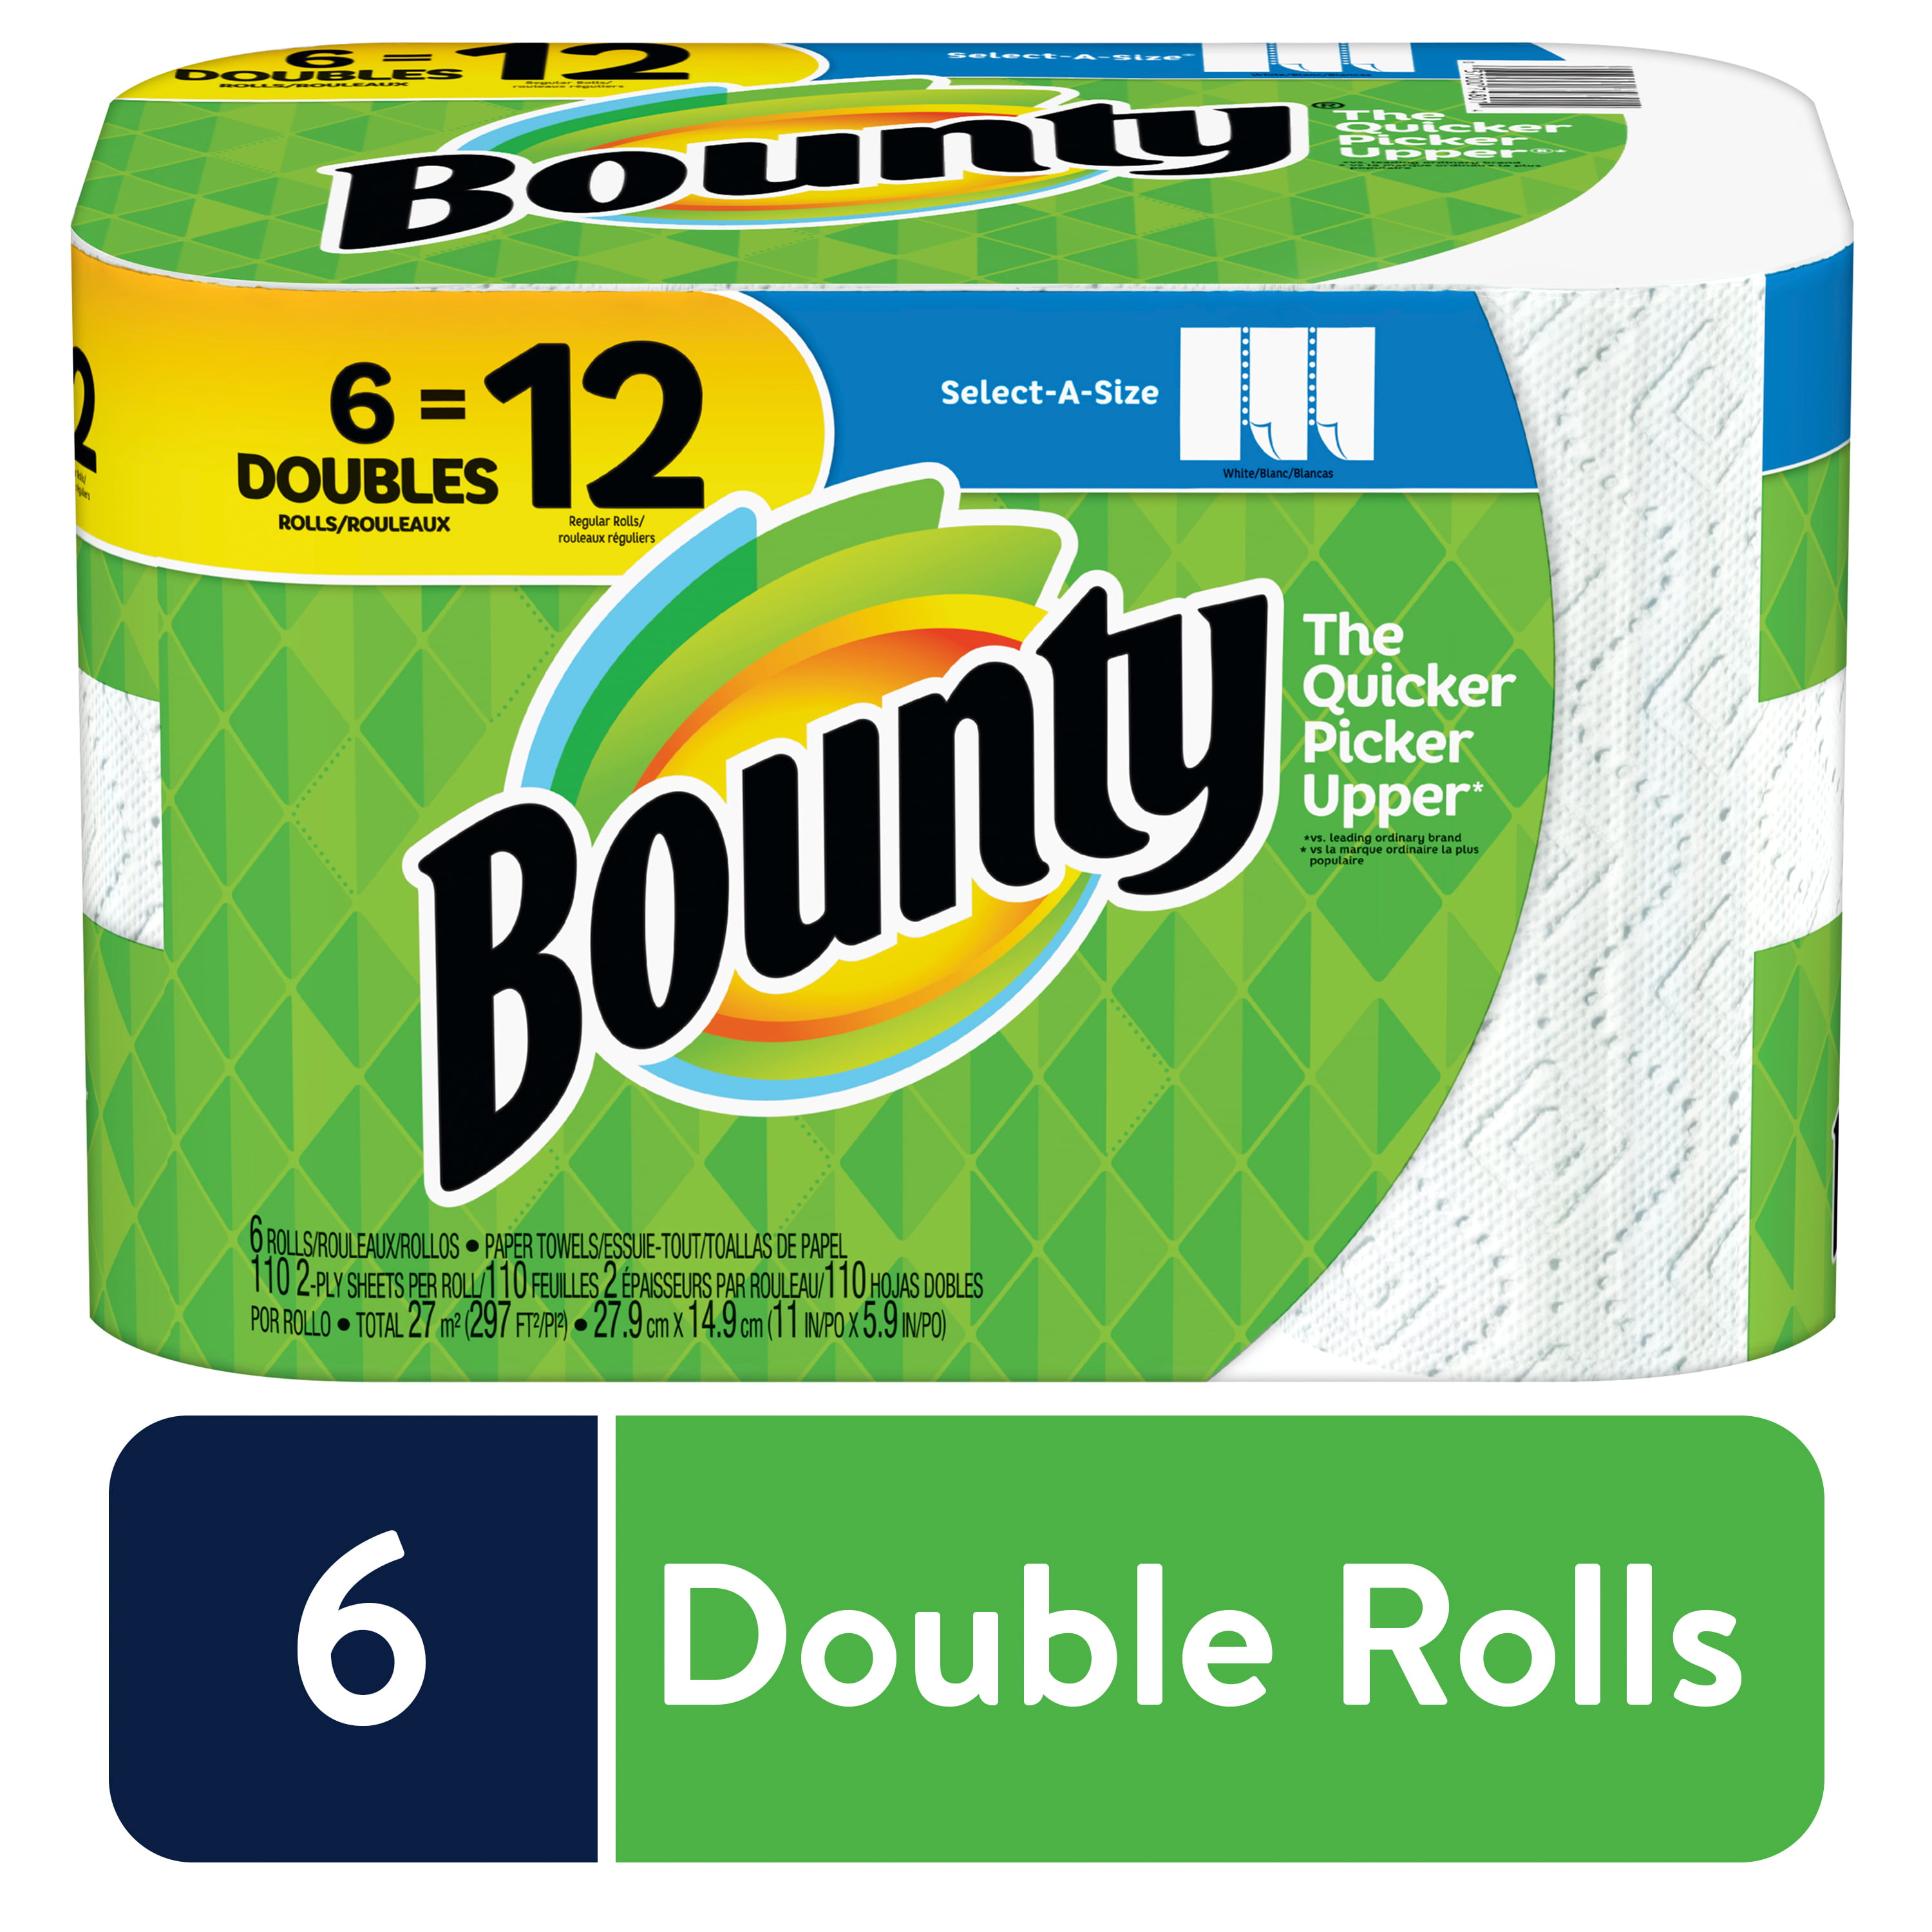 , ****NEW**** FREE SHIPPING Select Qt White, HUGE Roll Bounty Paper Towels 